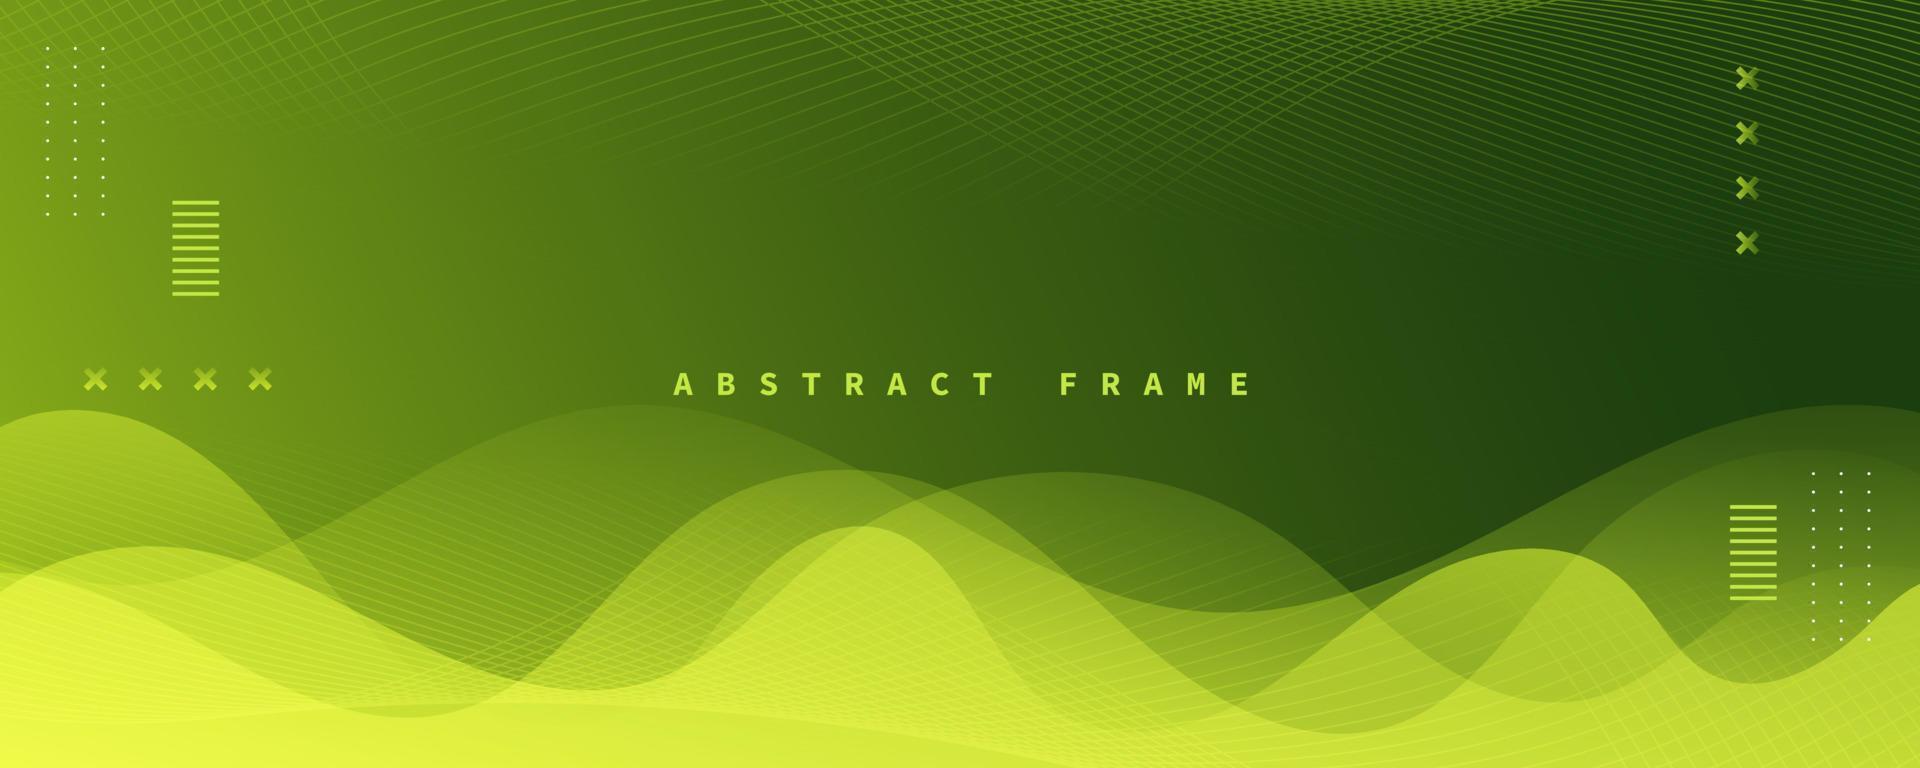 background banners. full of colors, bright green dark gradations wave effect vector